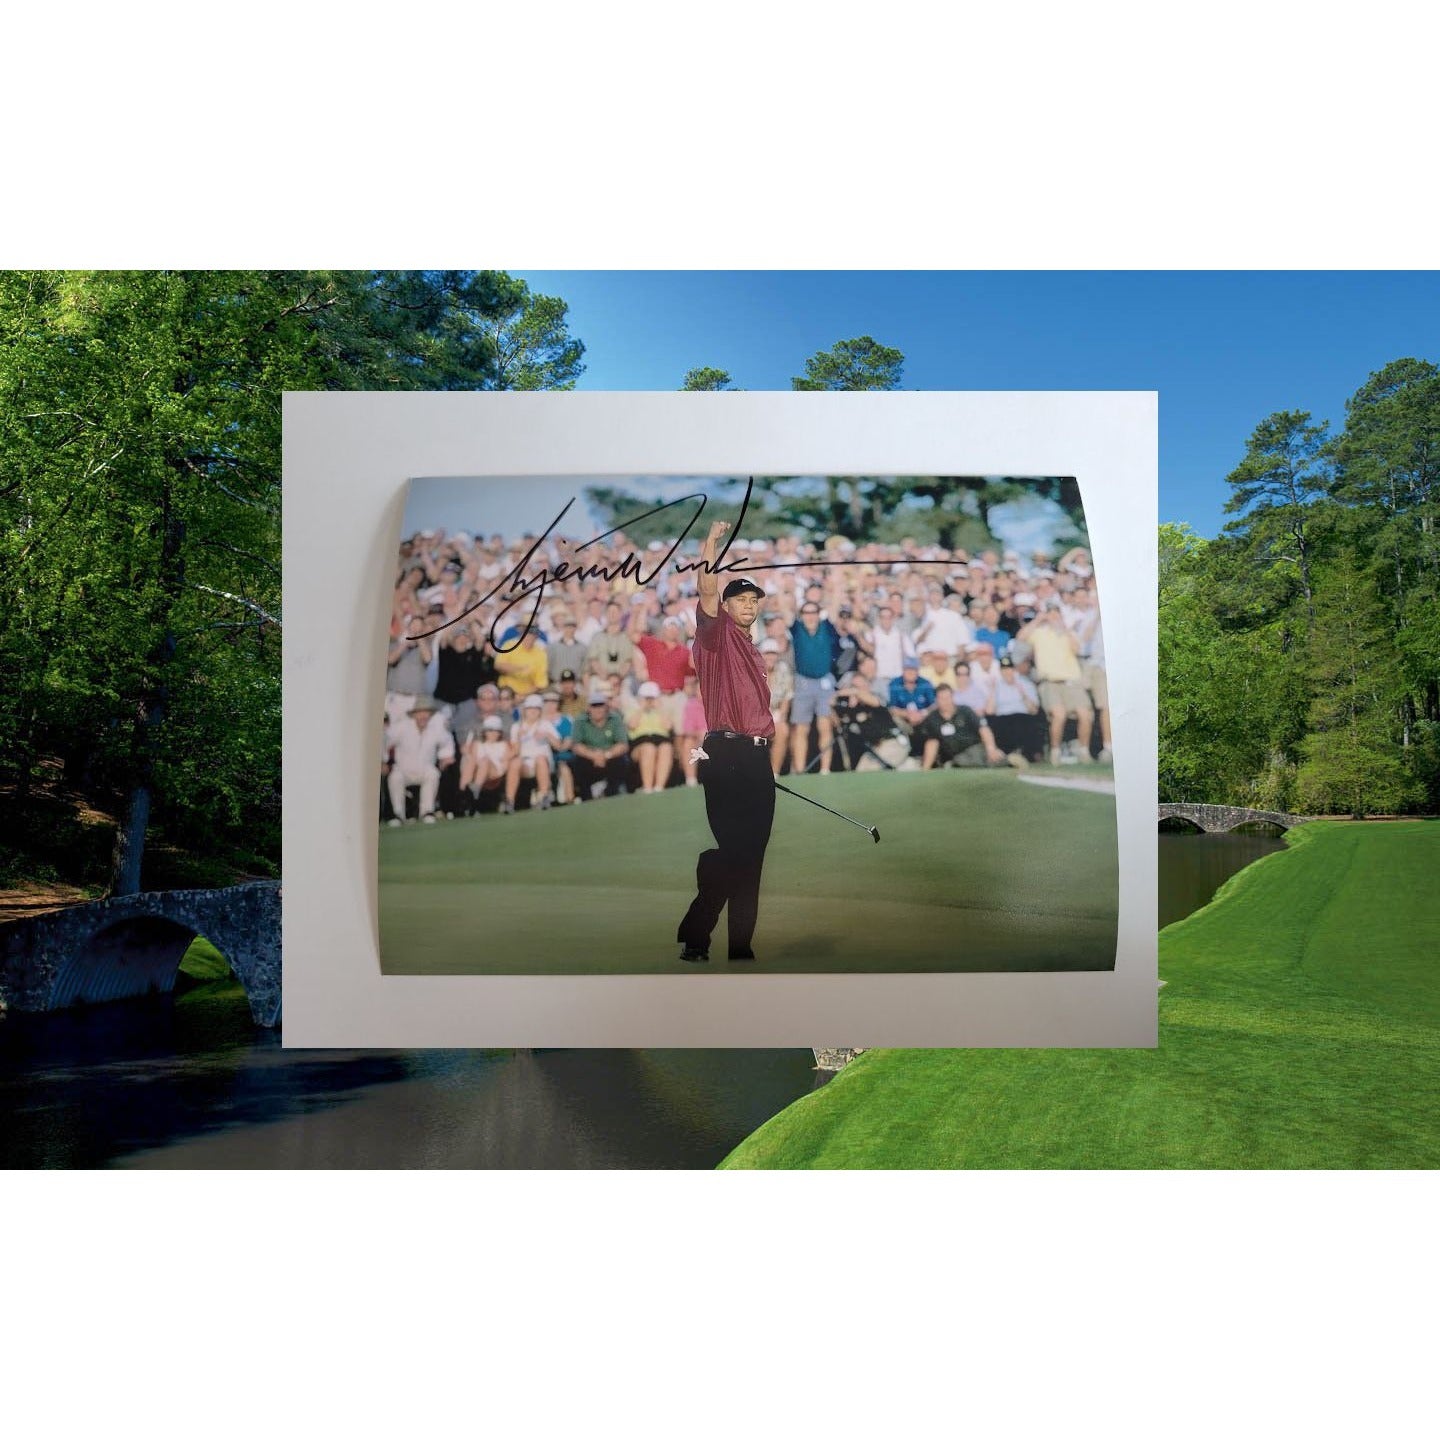 Tiger Woods 5 x 7 photograph signed